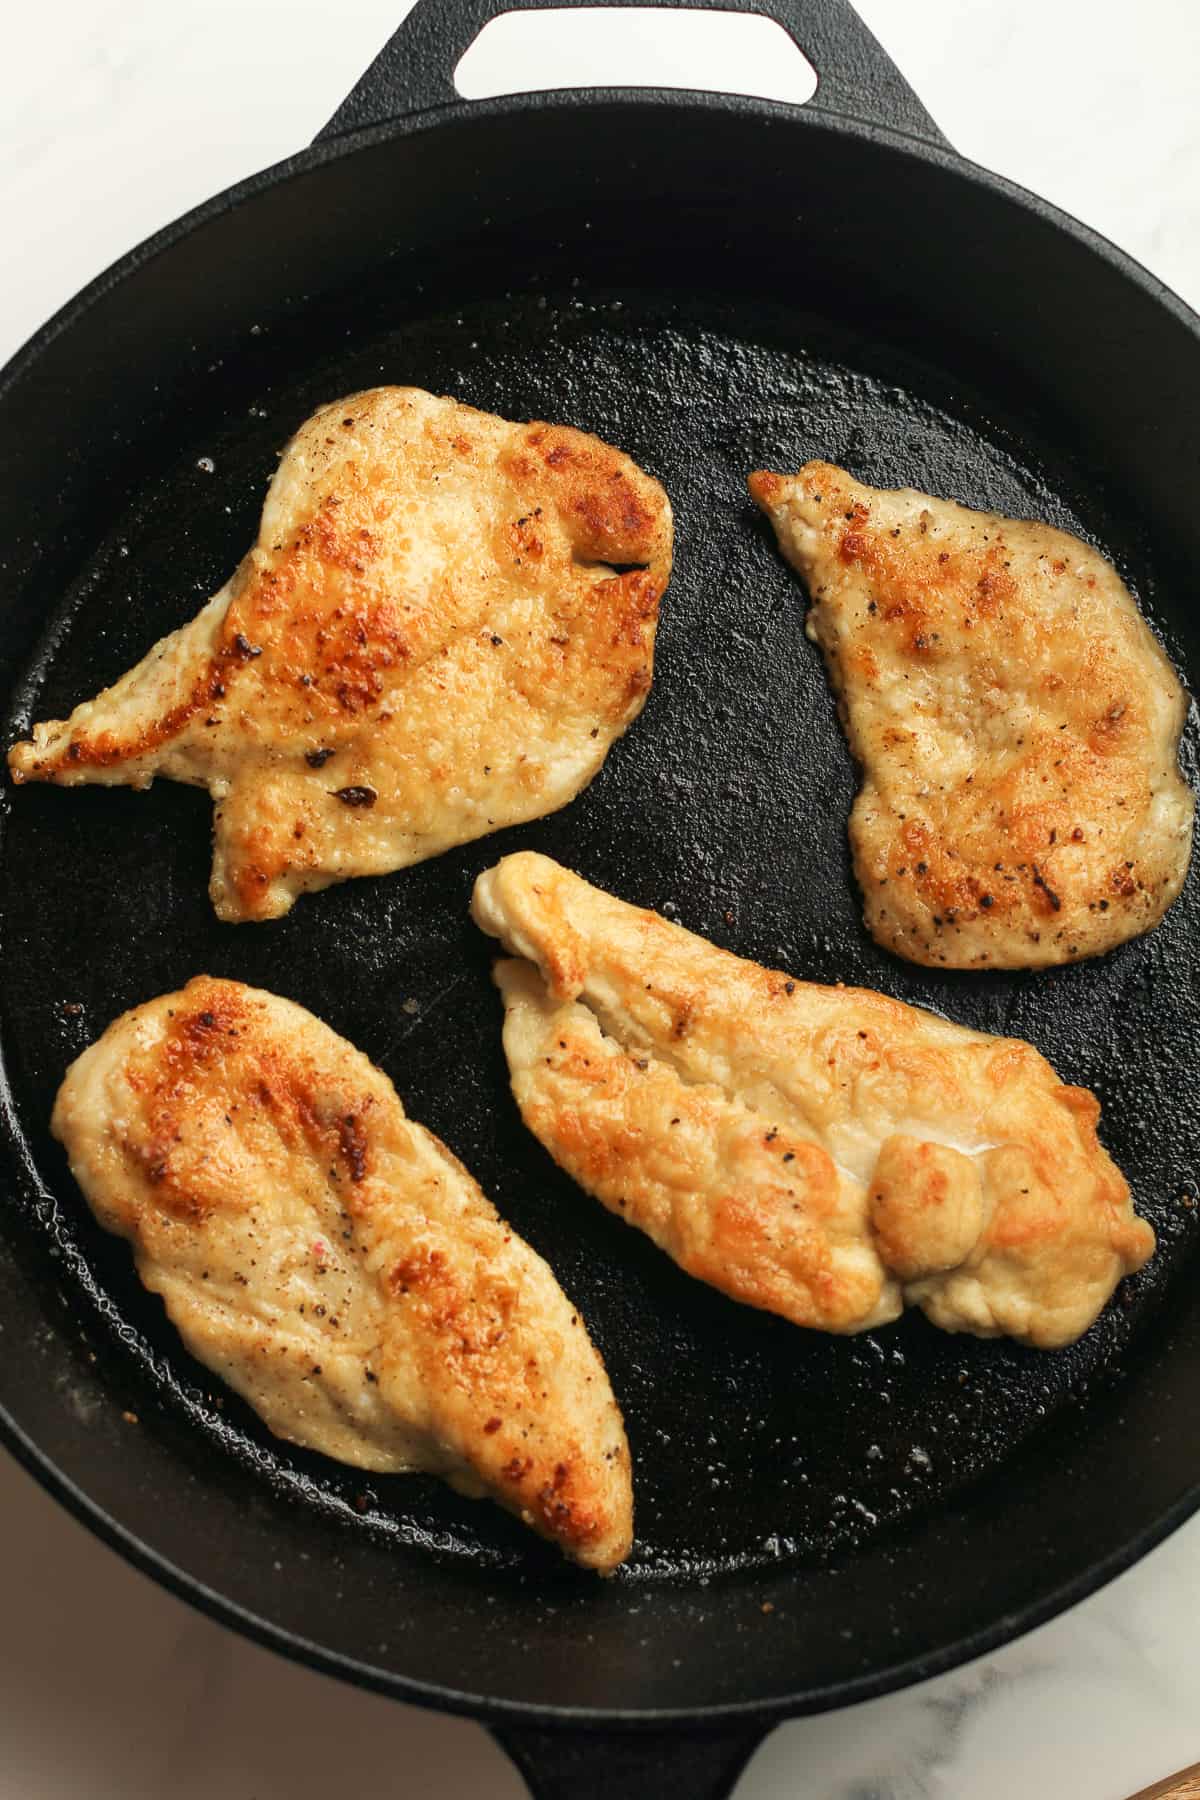 A skillet of the browned chicken breasts.